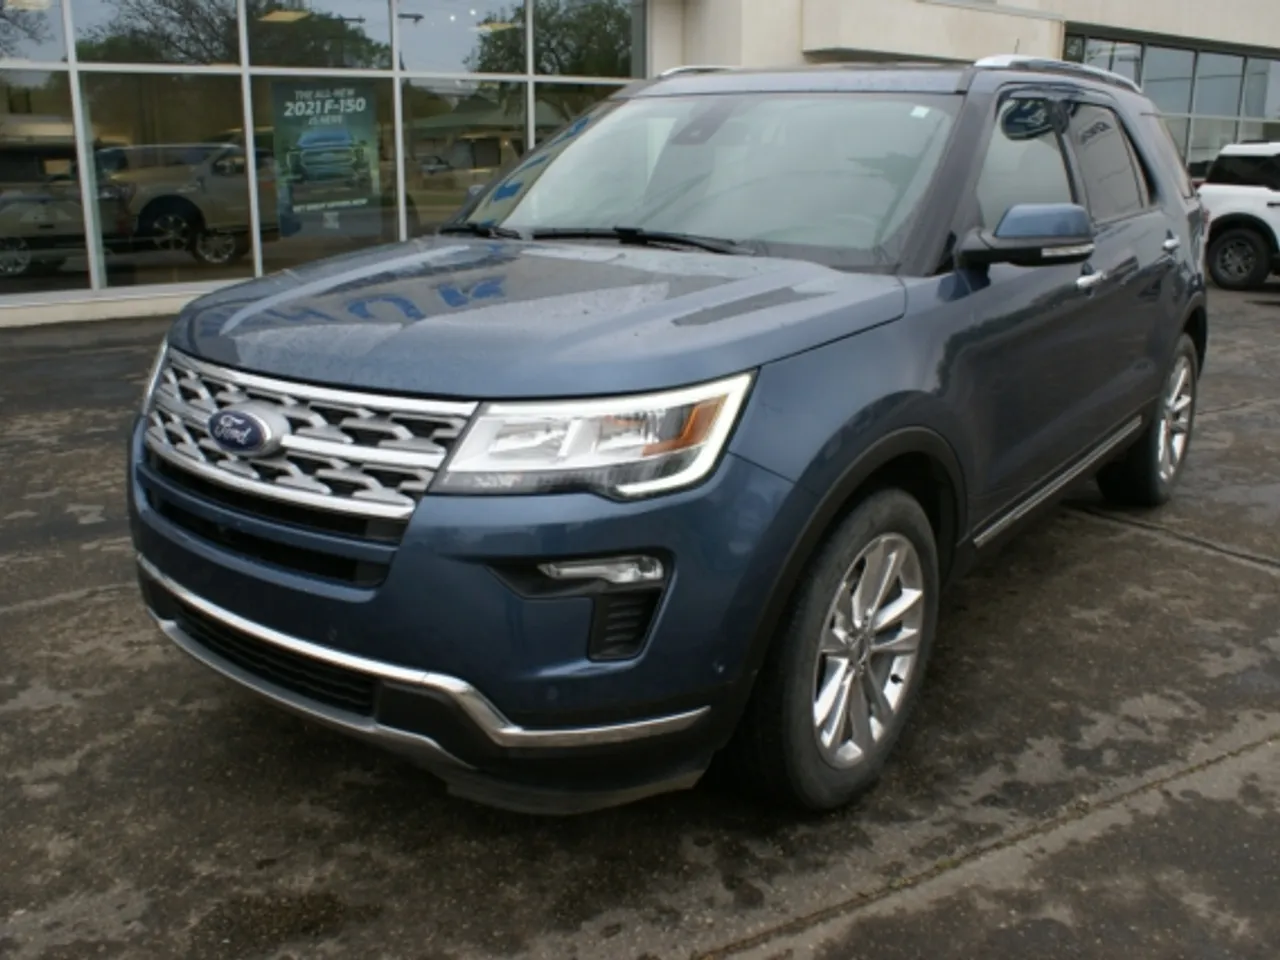 19 Ford Explorer For Sale Heyauto